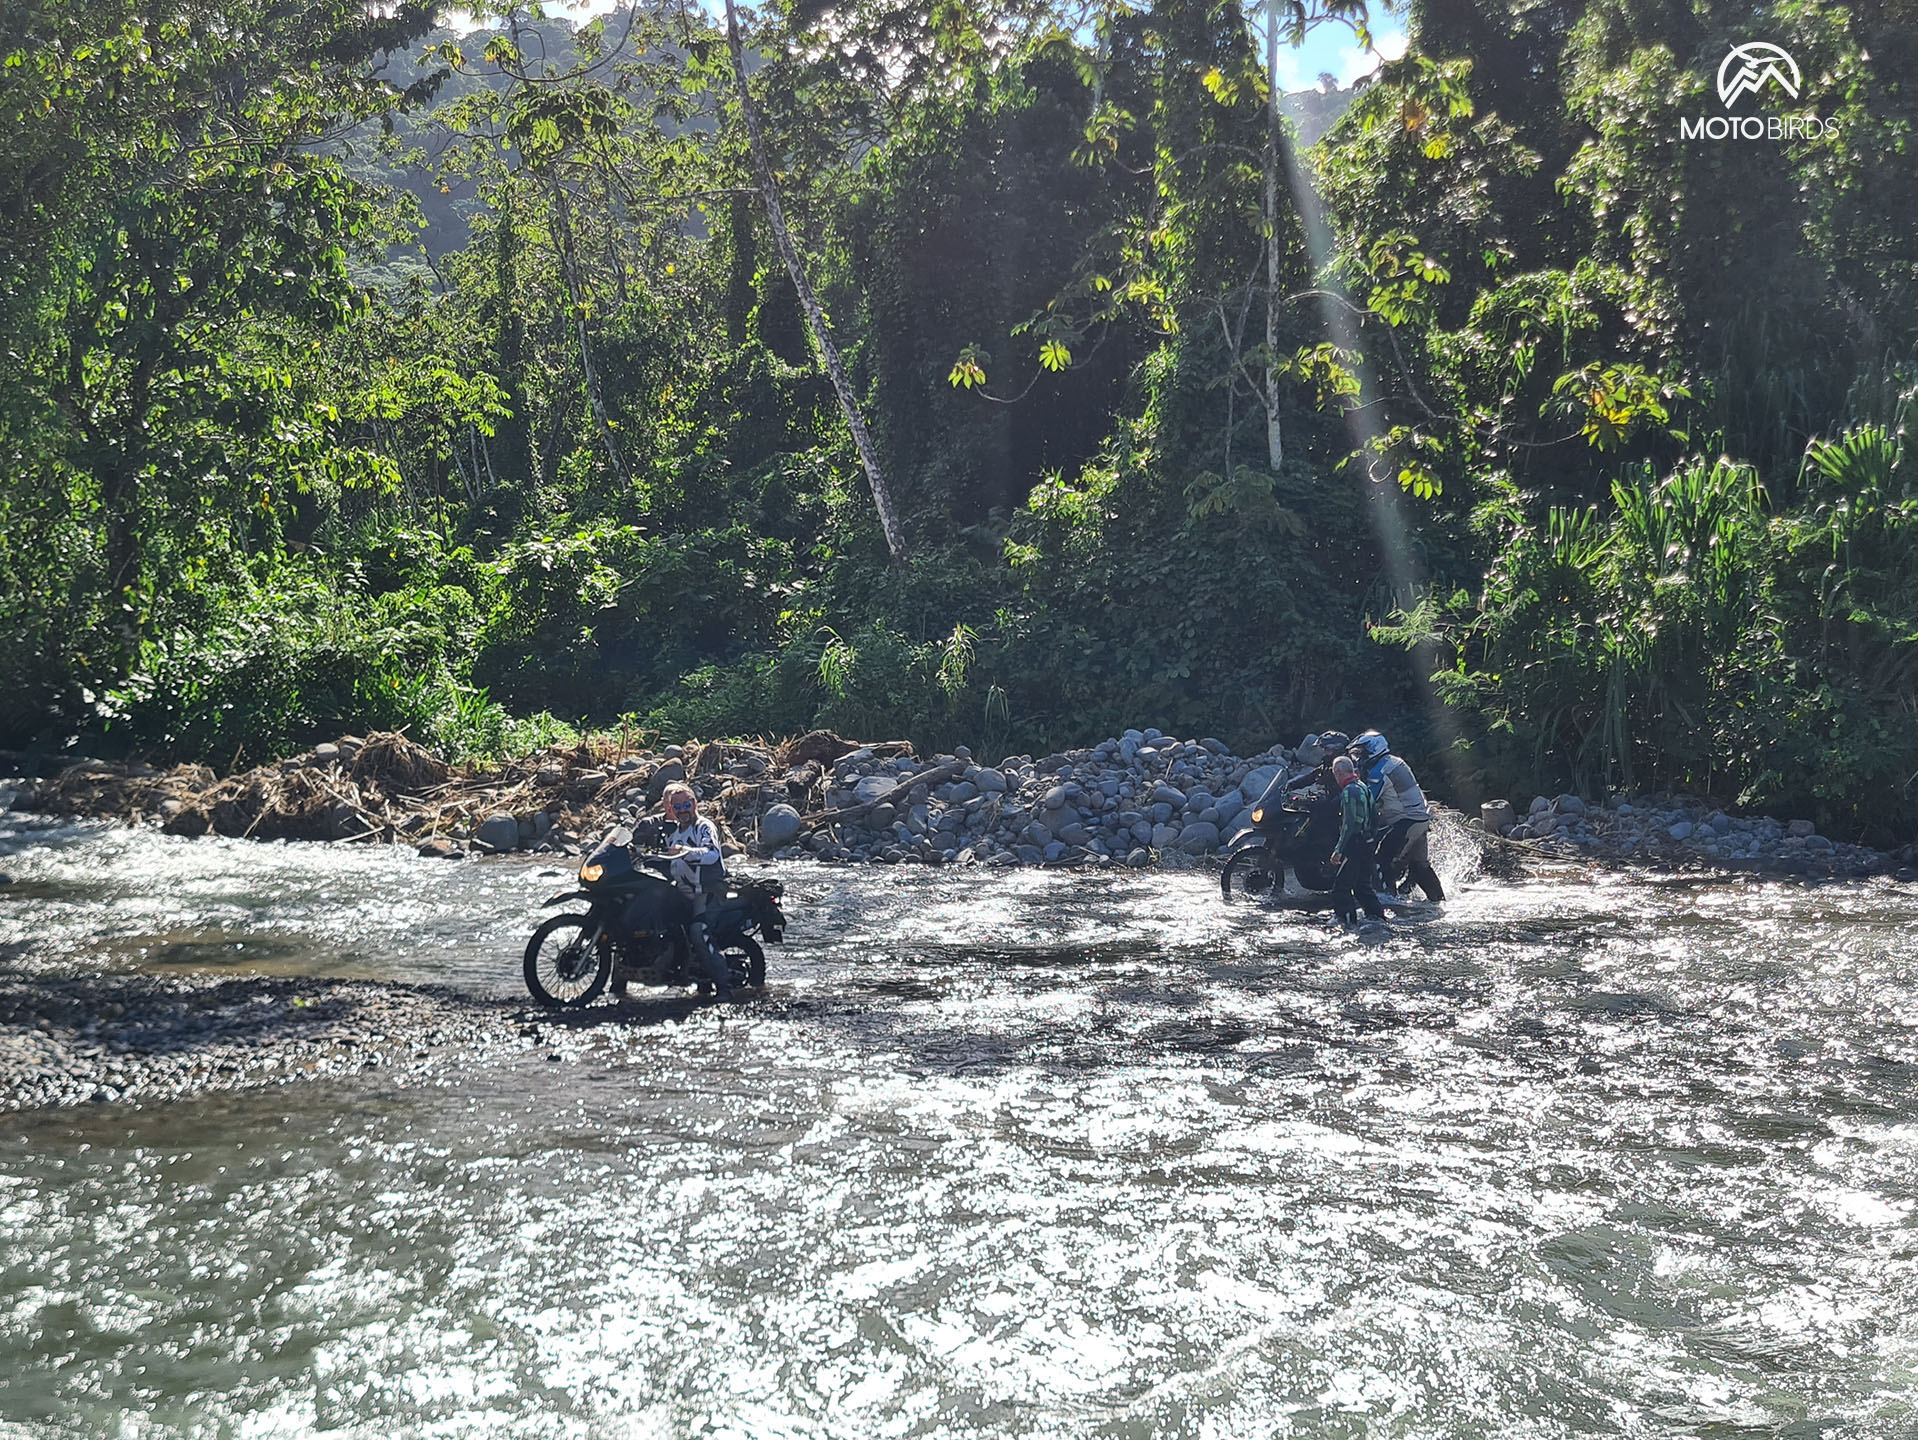 Motorcycle expedition to Costa Rica organized by MotoBirds